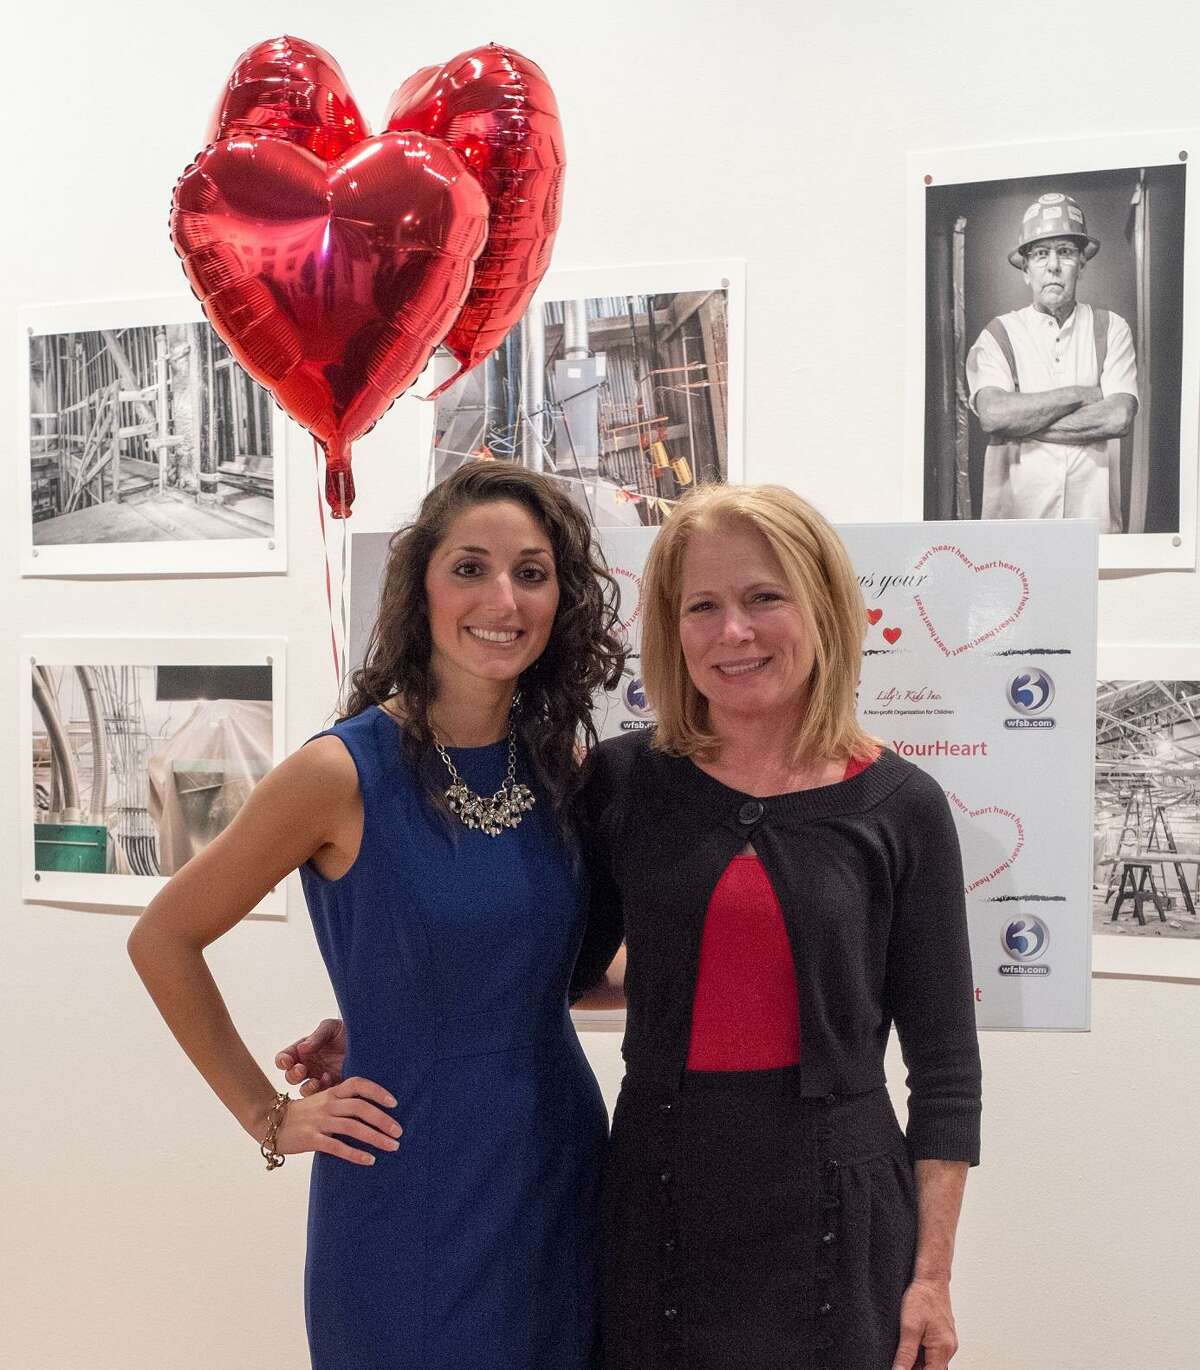 Lily?’s Kids will host its third Show Us Your Heart fundraising event on Saturday, Oct. 21 from 3 to 6 p.m. at MAC 650 Gallery & Artist Co-Op, located at 650 Main St. in Middletown.